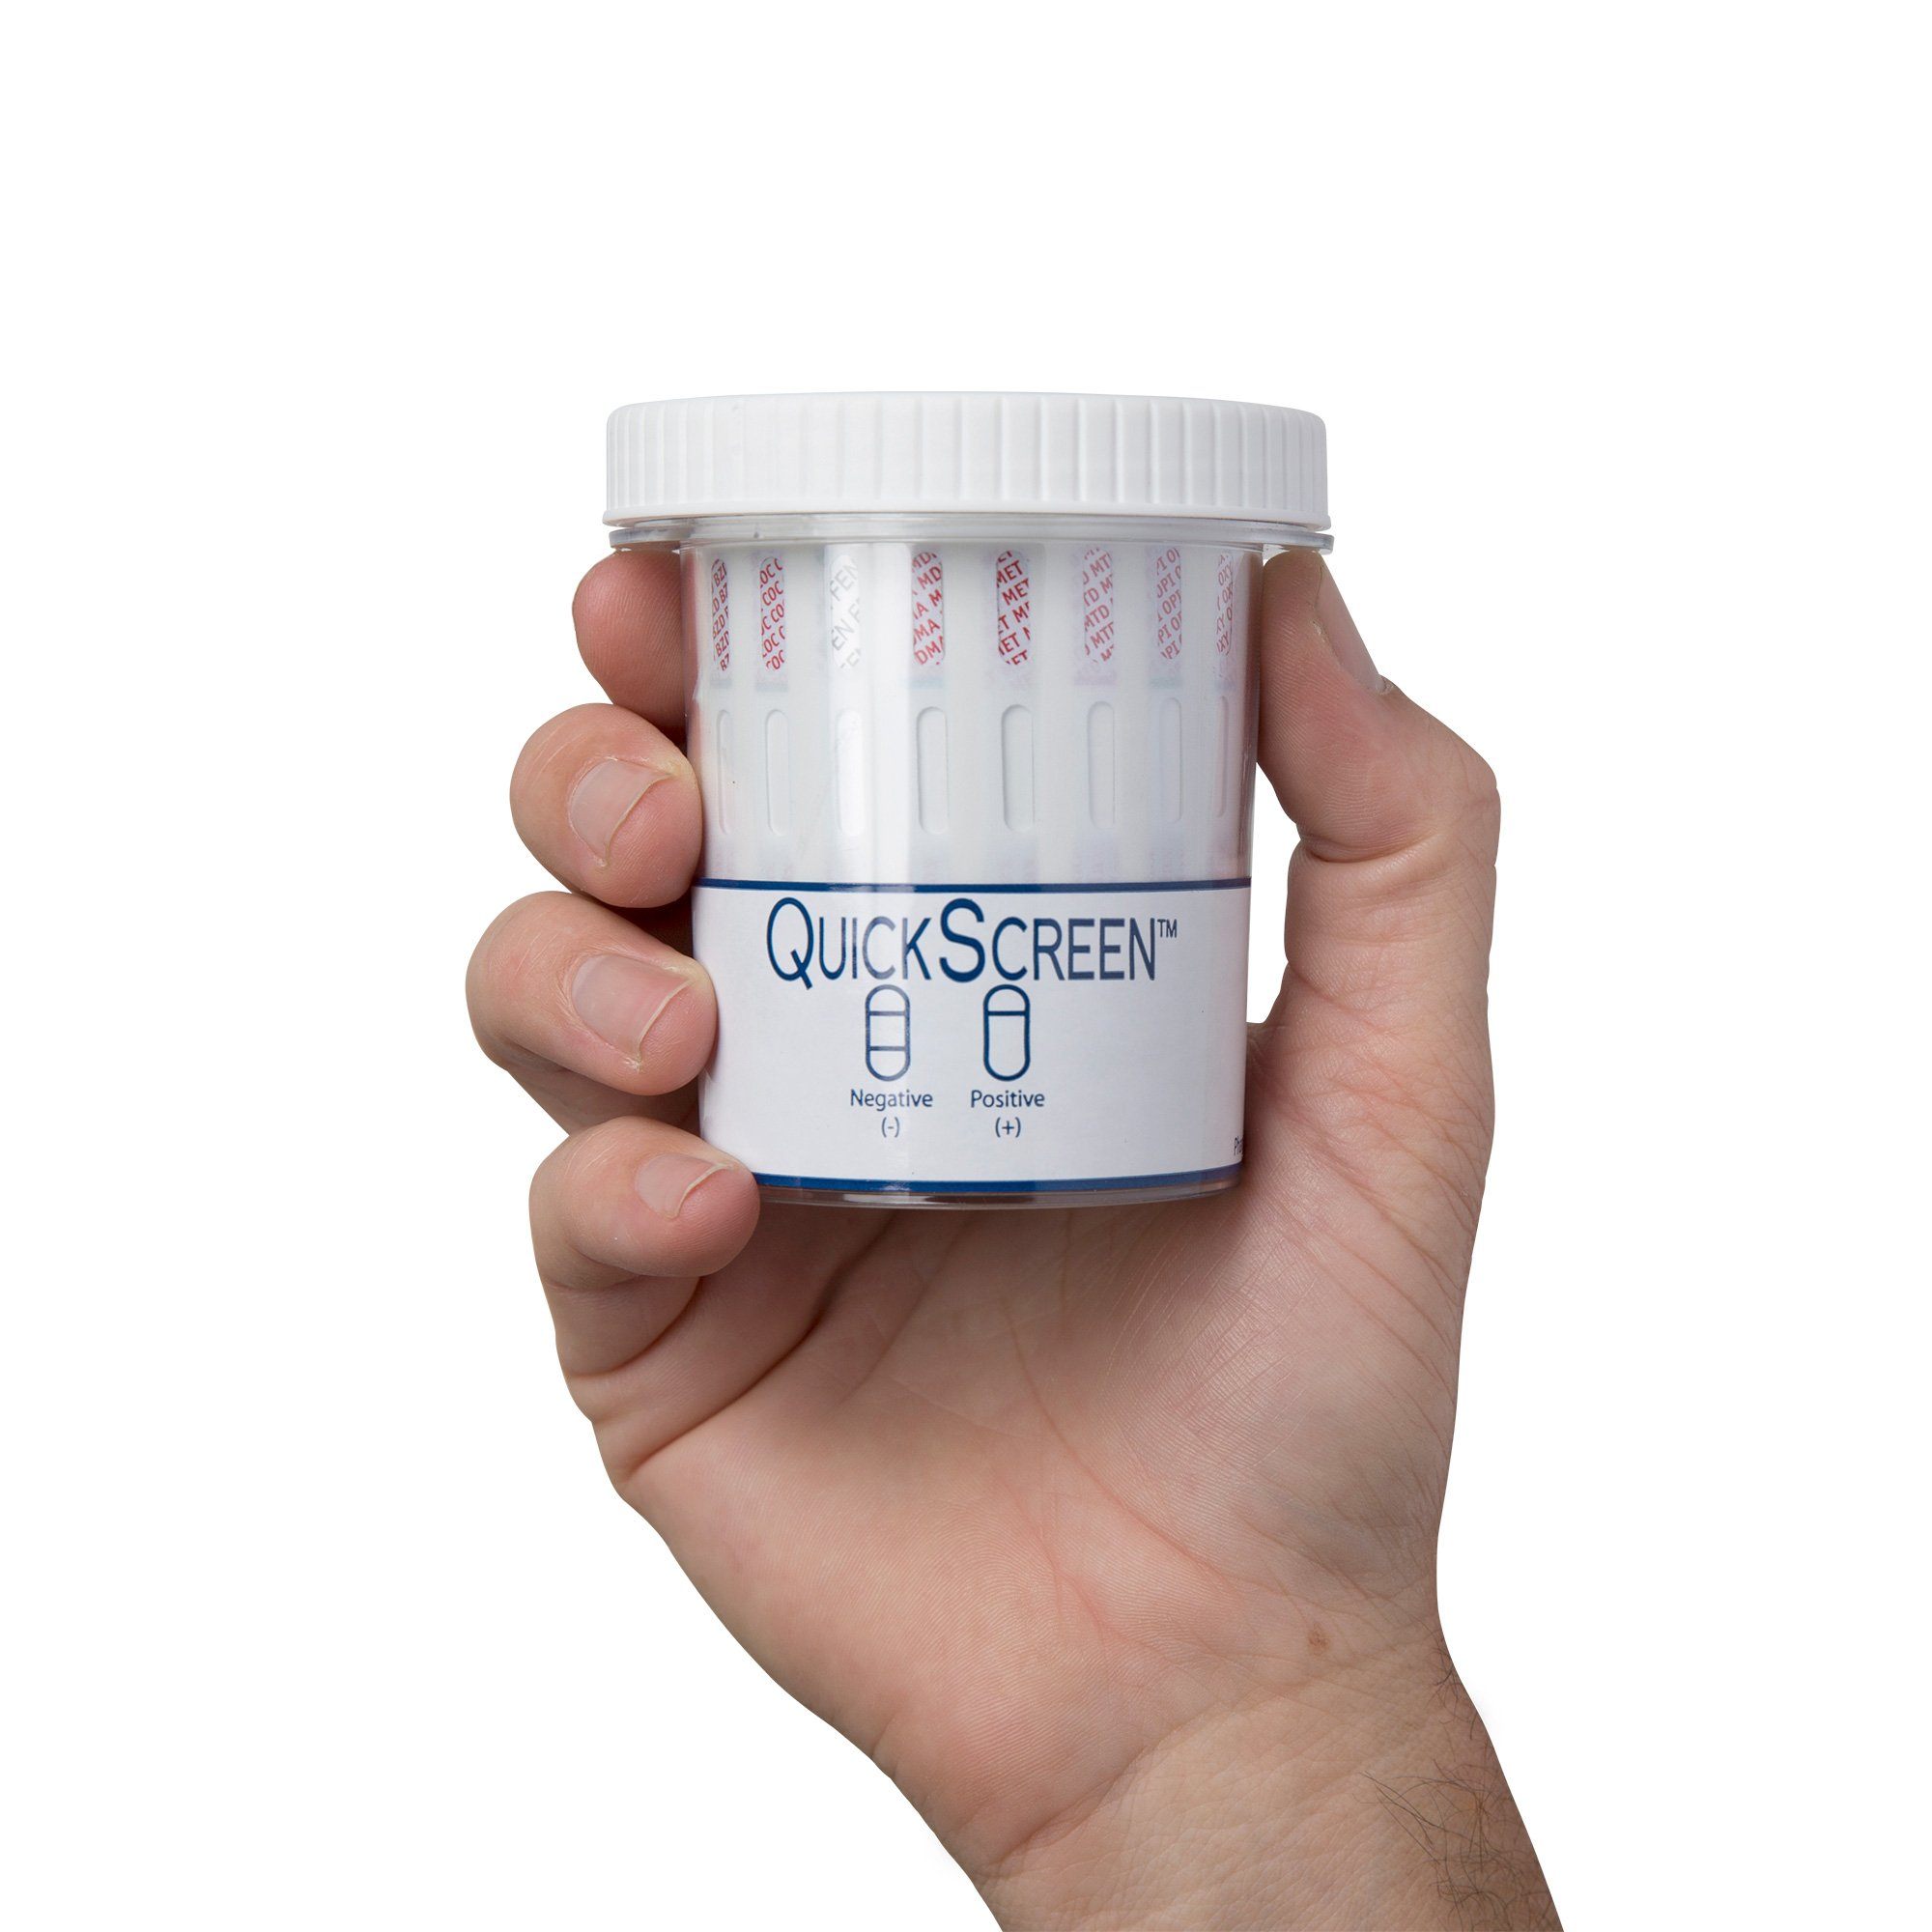 QuickScreen Urine Drug Cup - 12 Drug Test With Adulteration